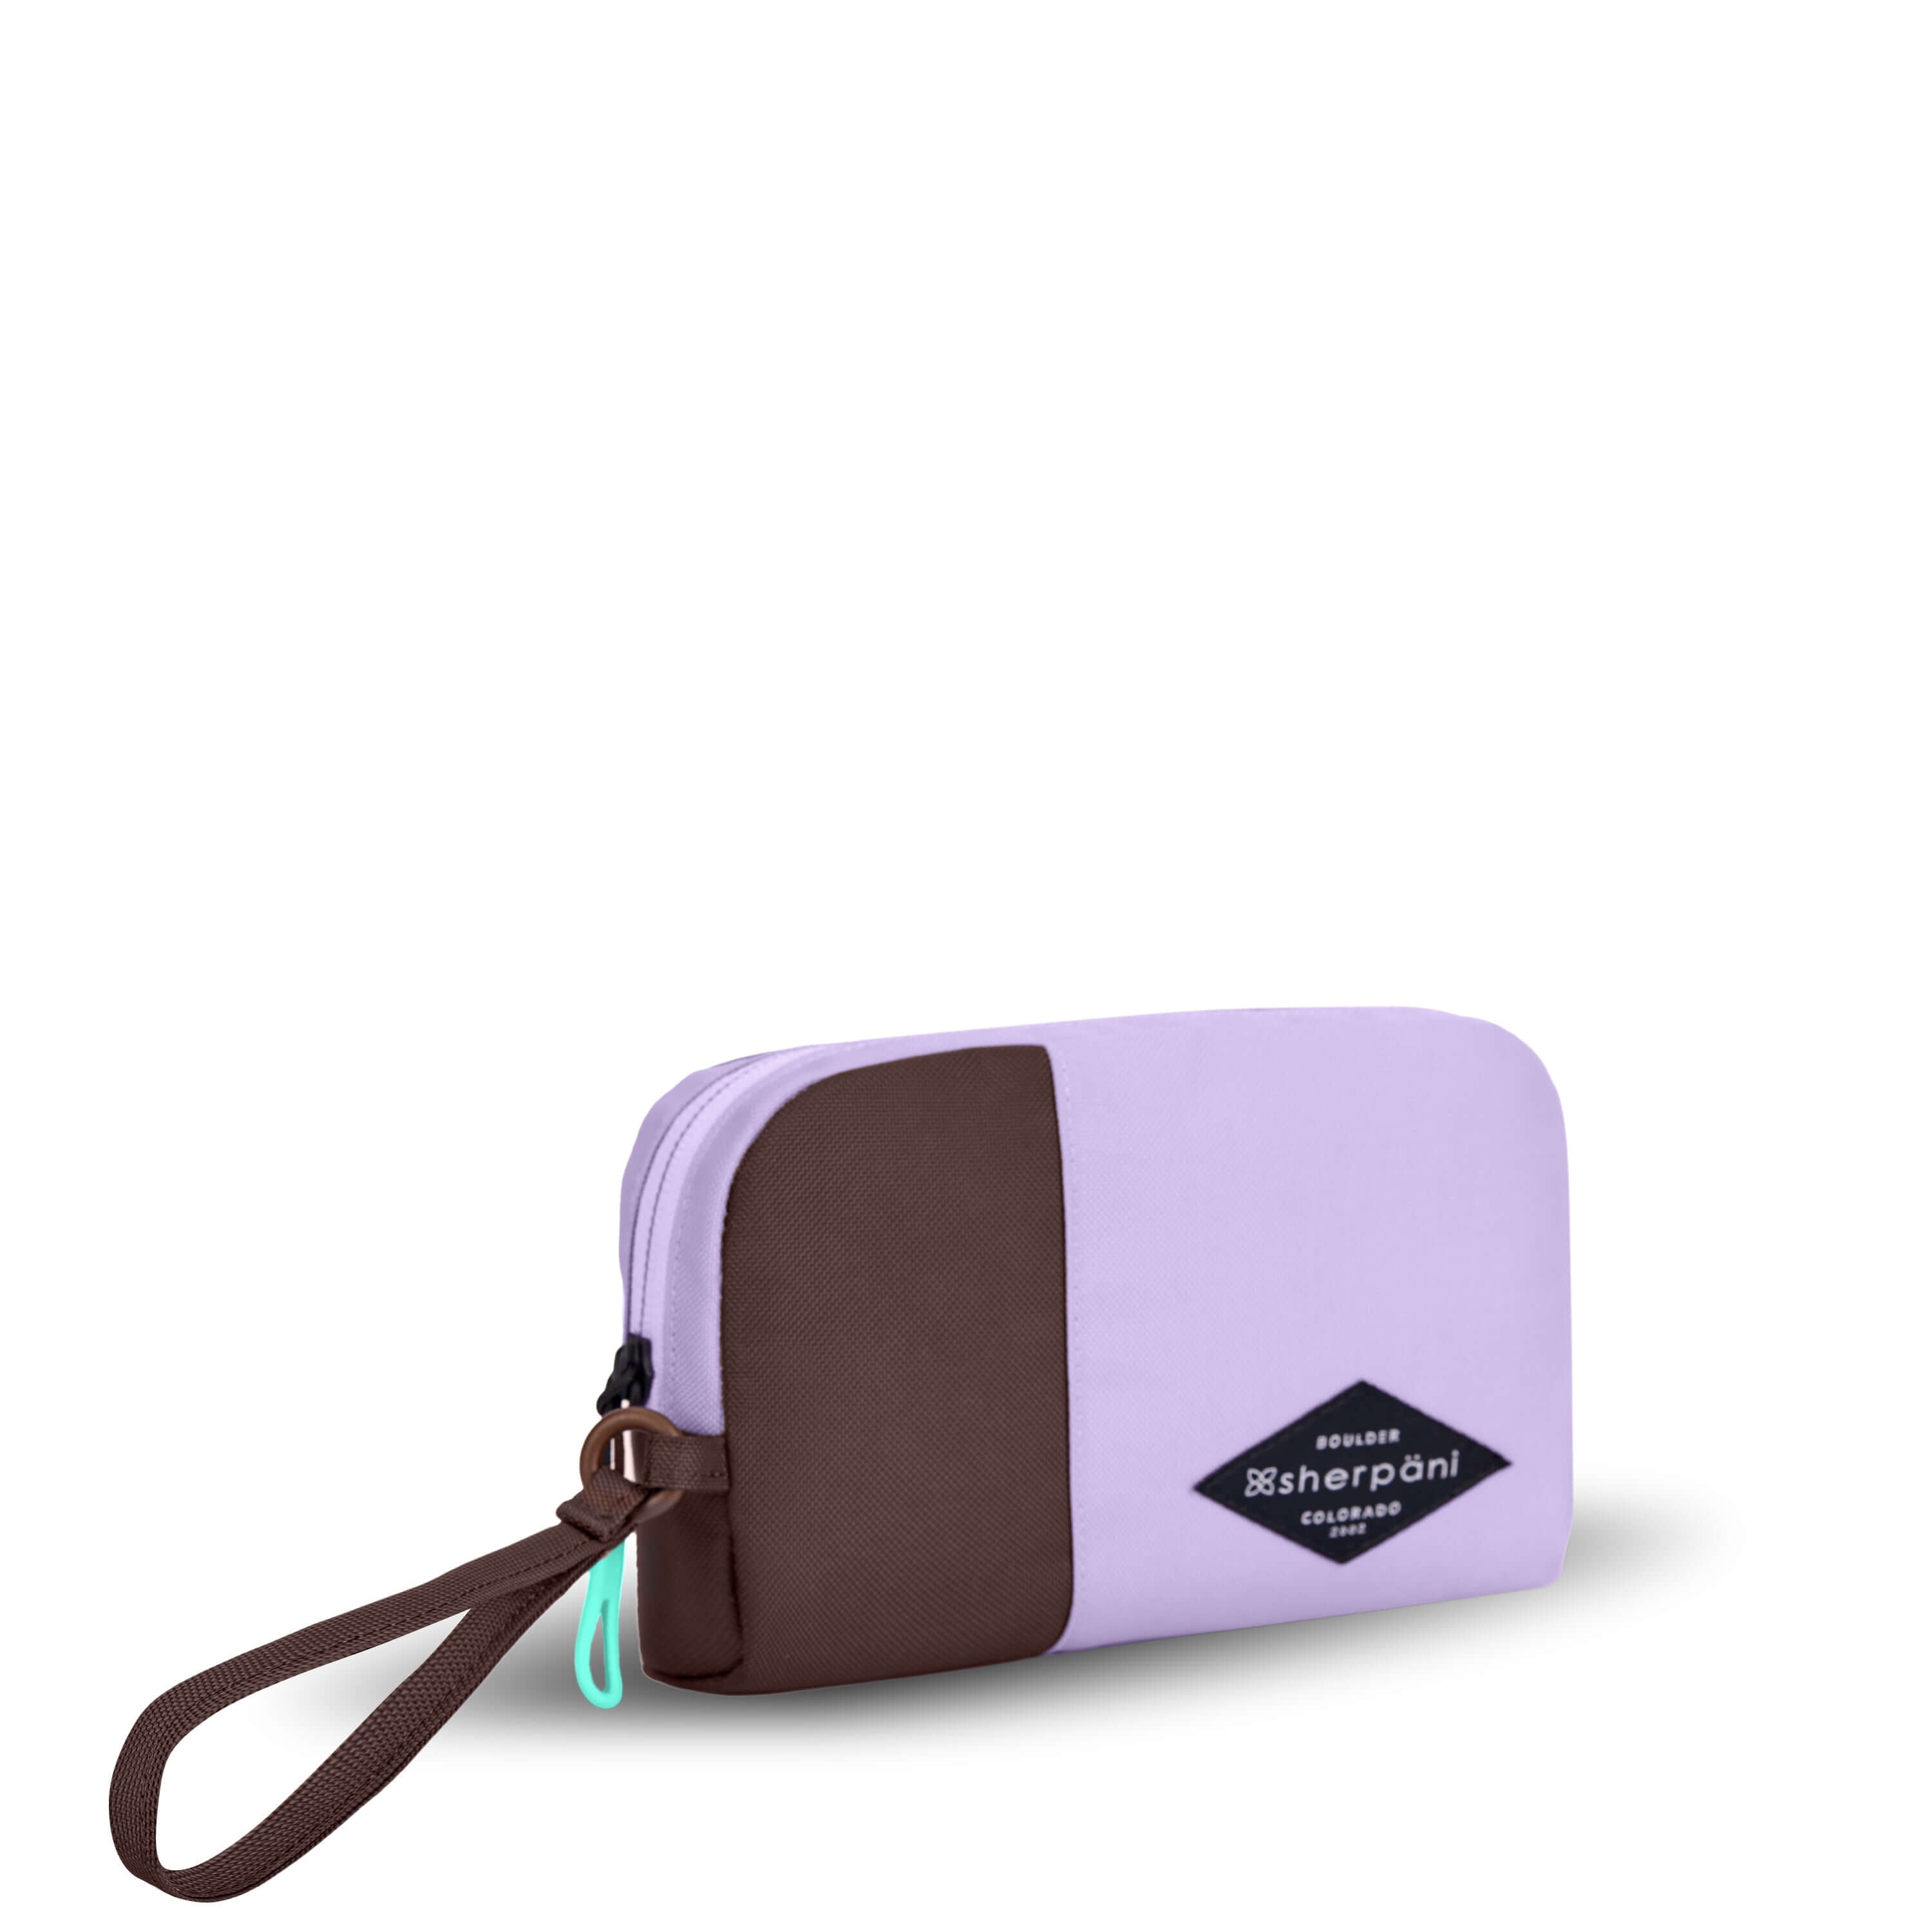 Angled front view of Sherpani travel accessory, the Jolie in Lavender, in small size. The pouch is two-toned in lavender and brown. It features a brown wristlet strap and an easy-pull zipper accented in aqua.